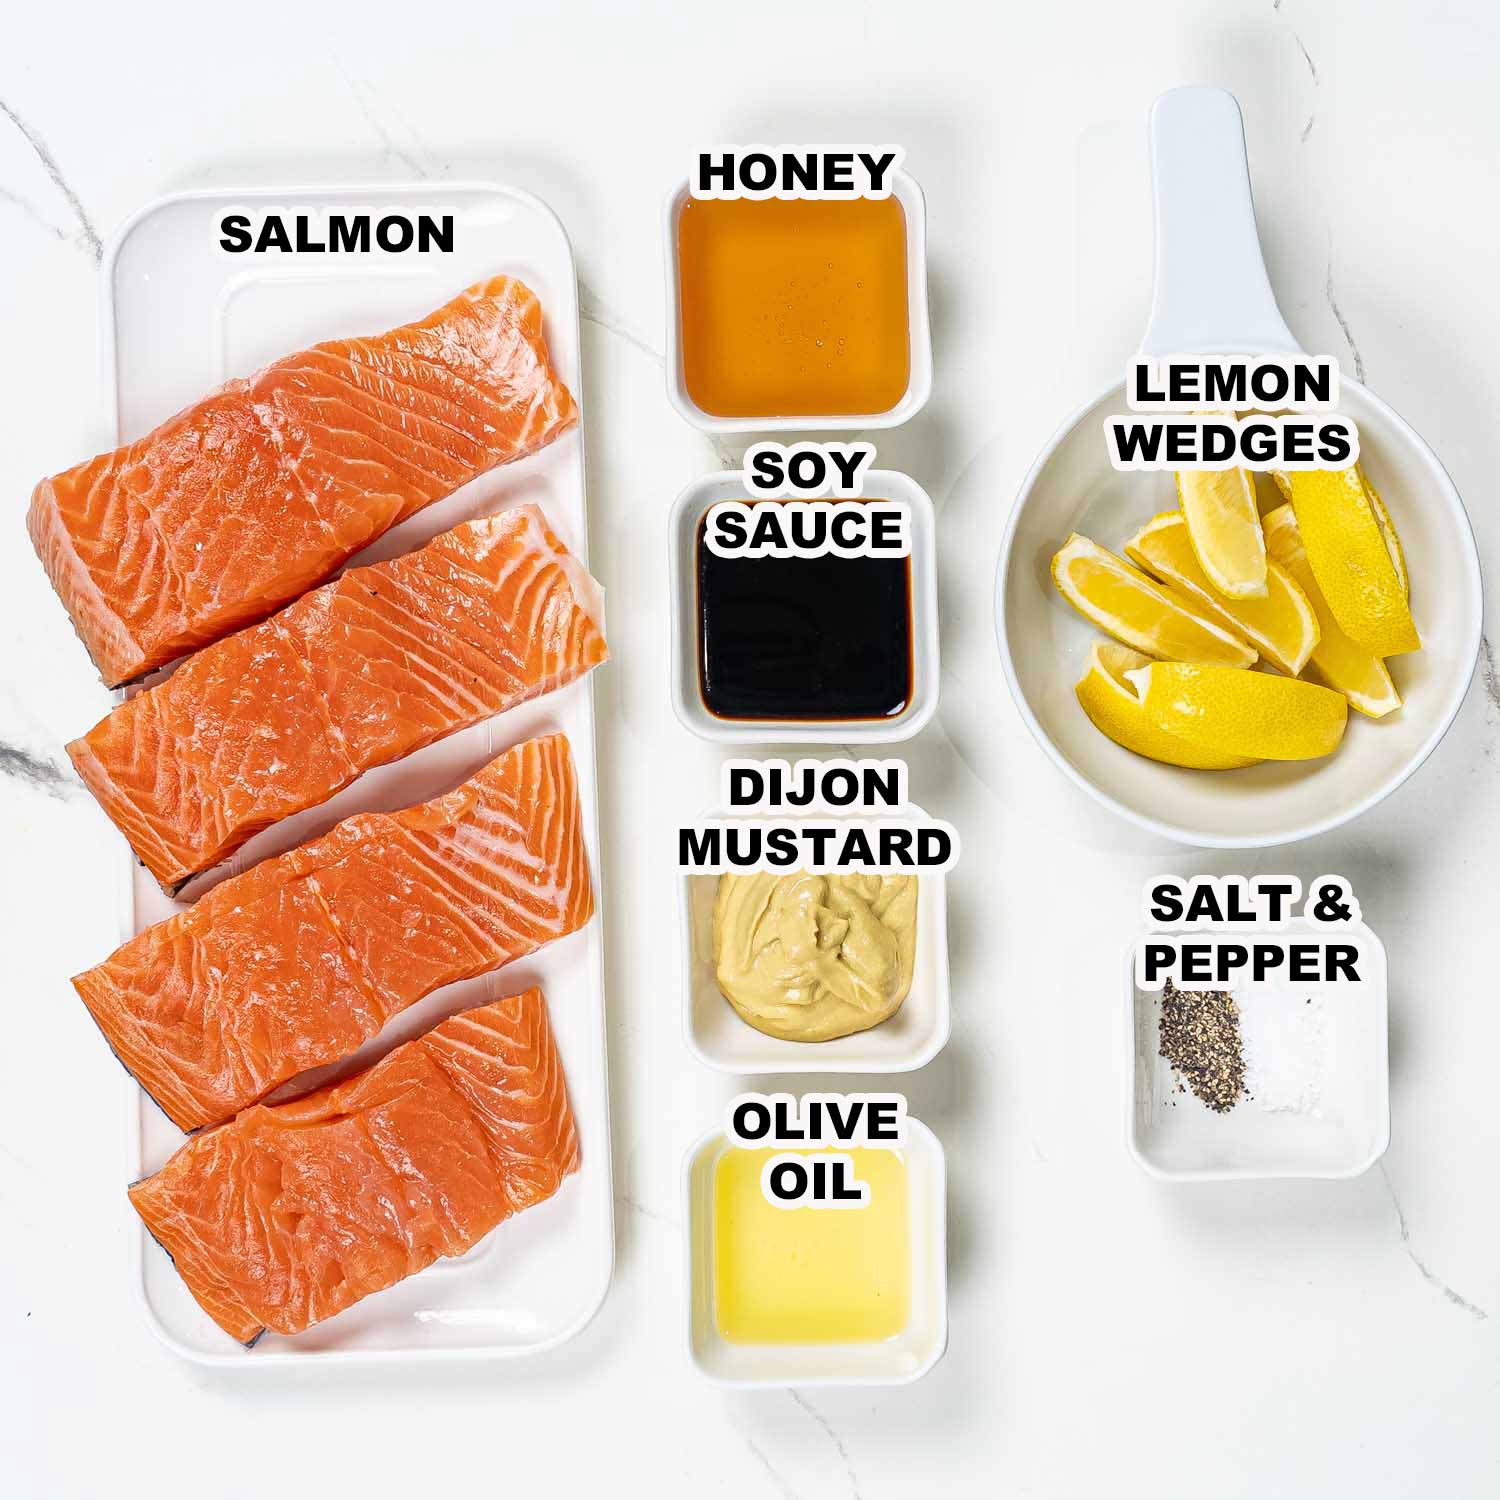 ingredients needed to make baked salmon with mustard glaze.